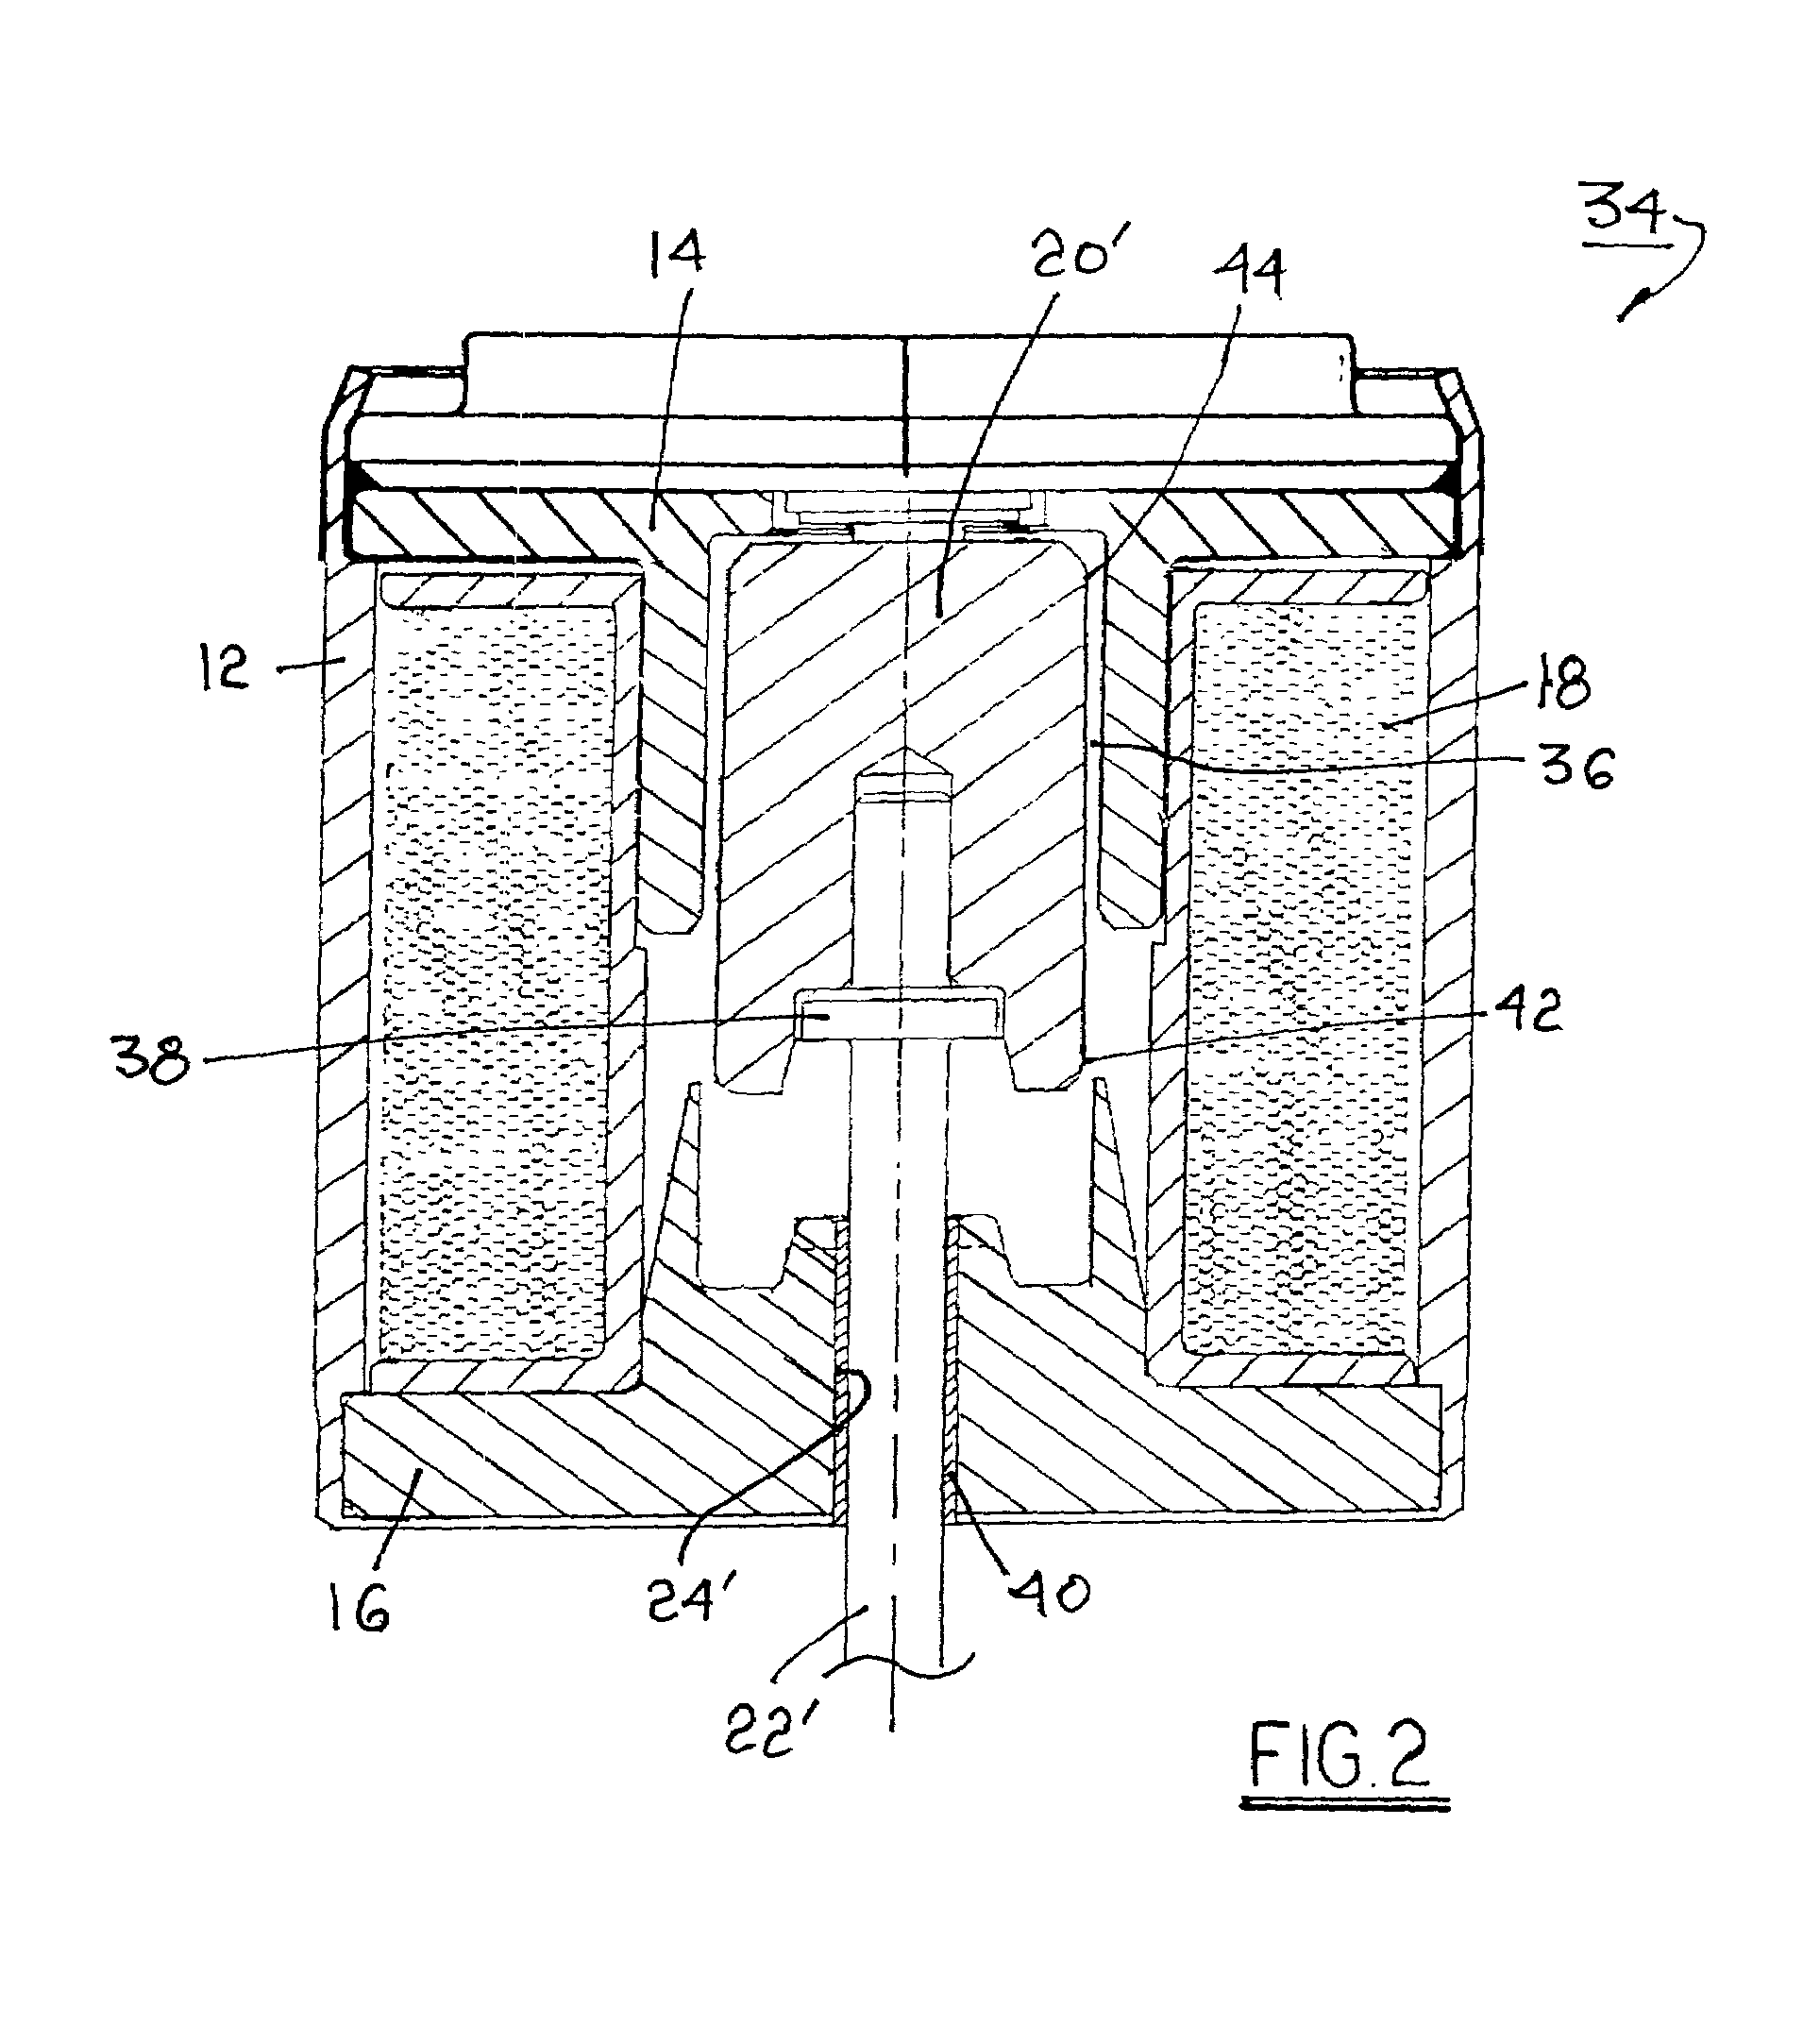 Sleeveless solenoid for a linear actuator